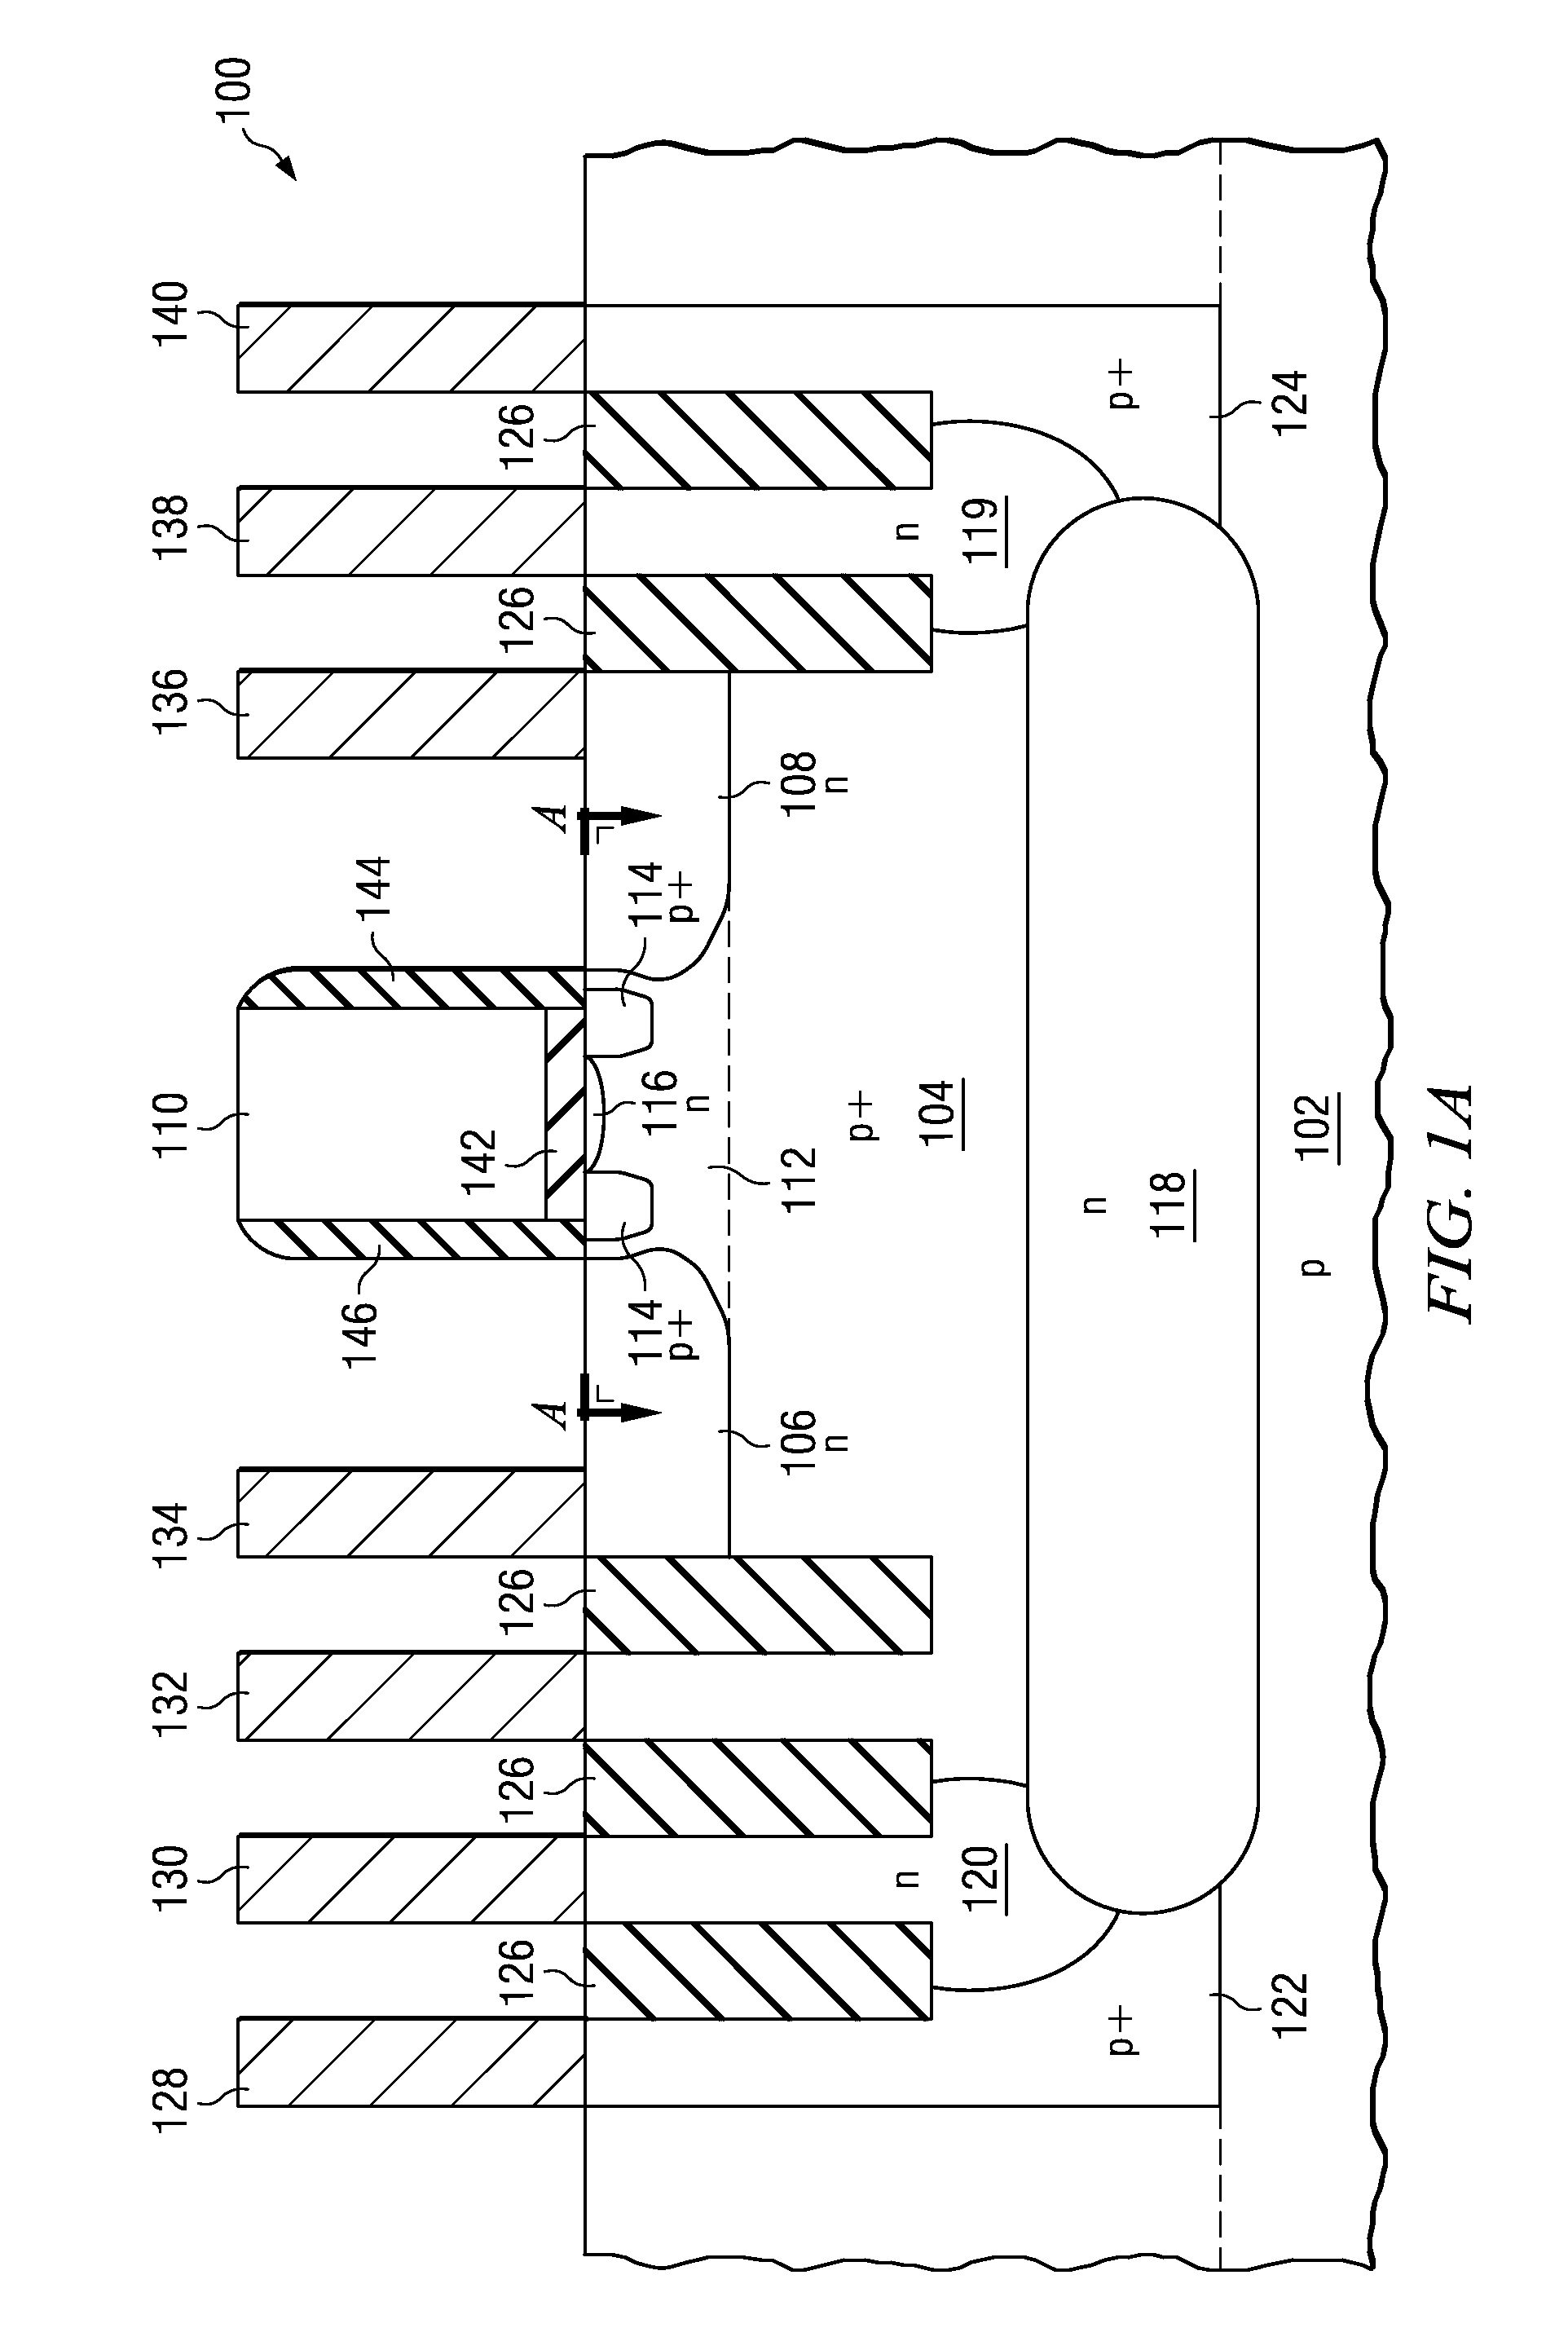 Gated resonant tunneling diode